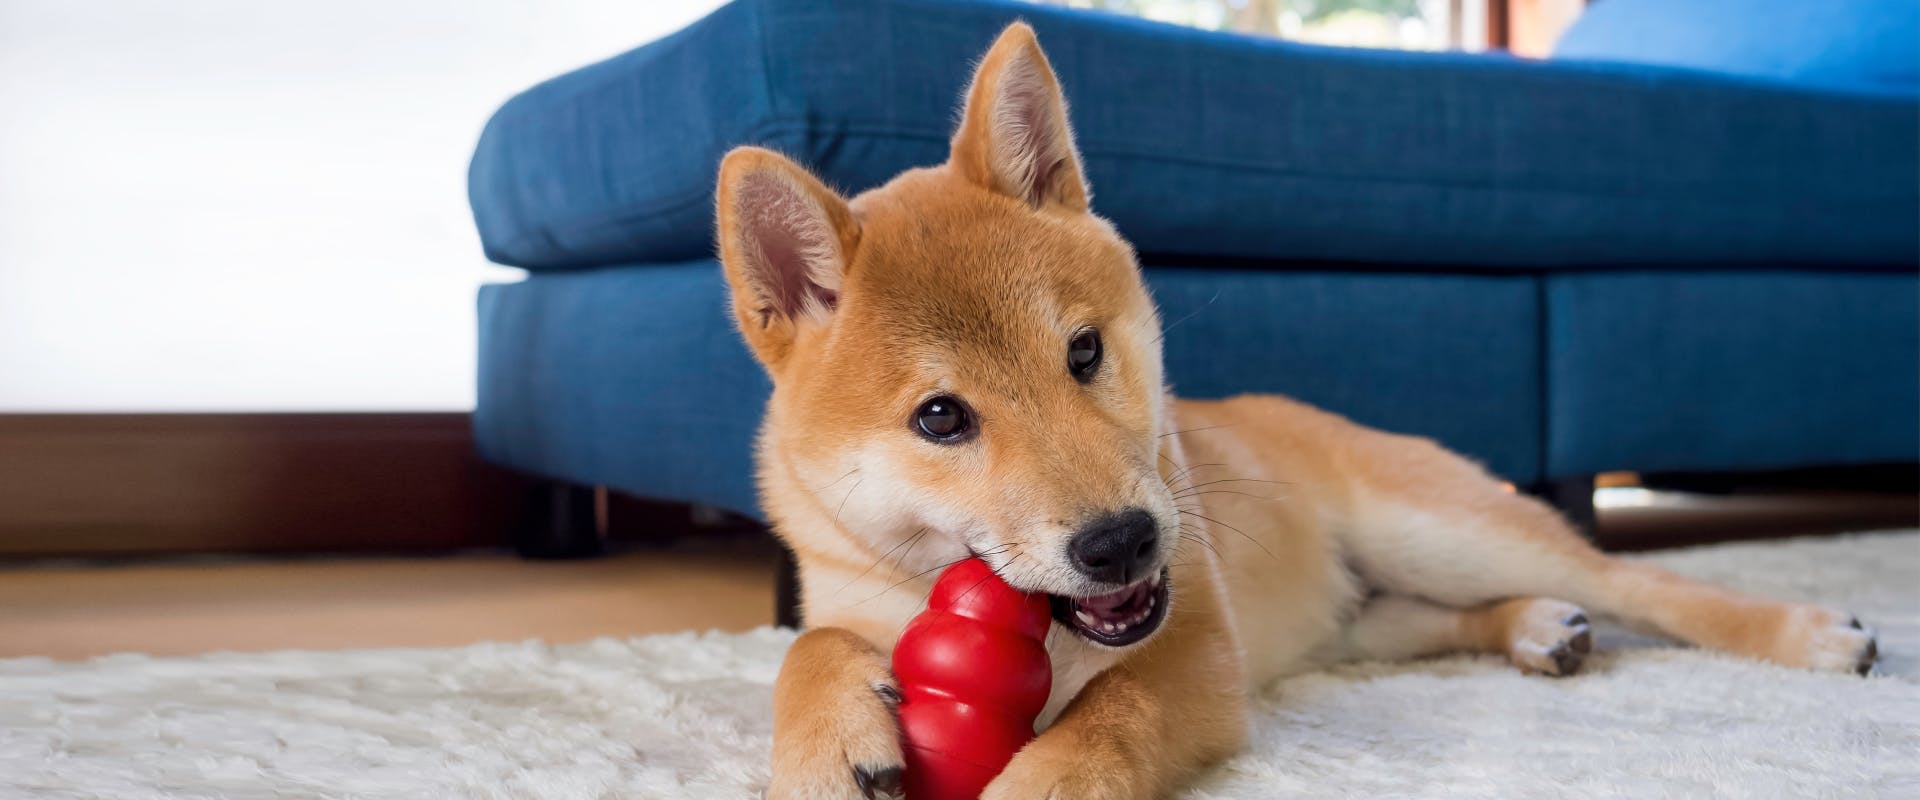 a shiba inu puppy chewing on a red chew toy